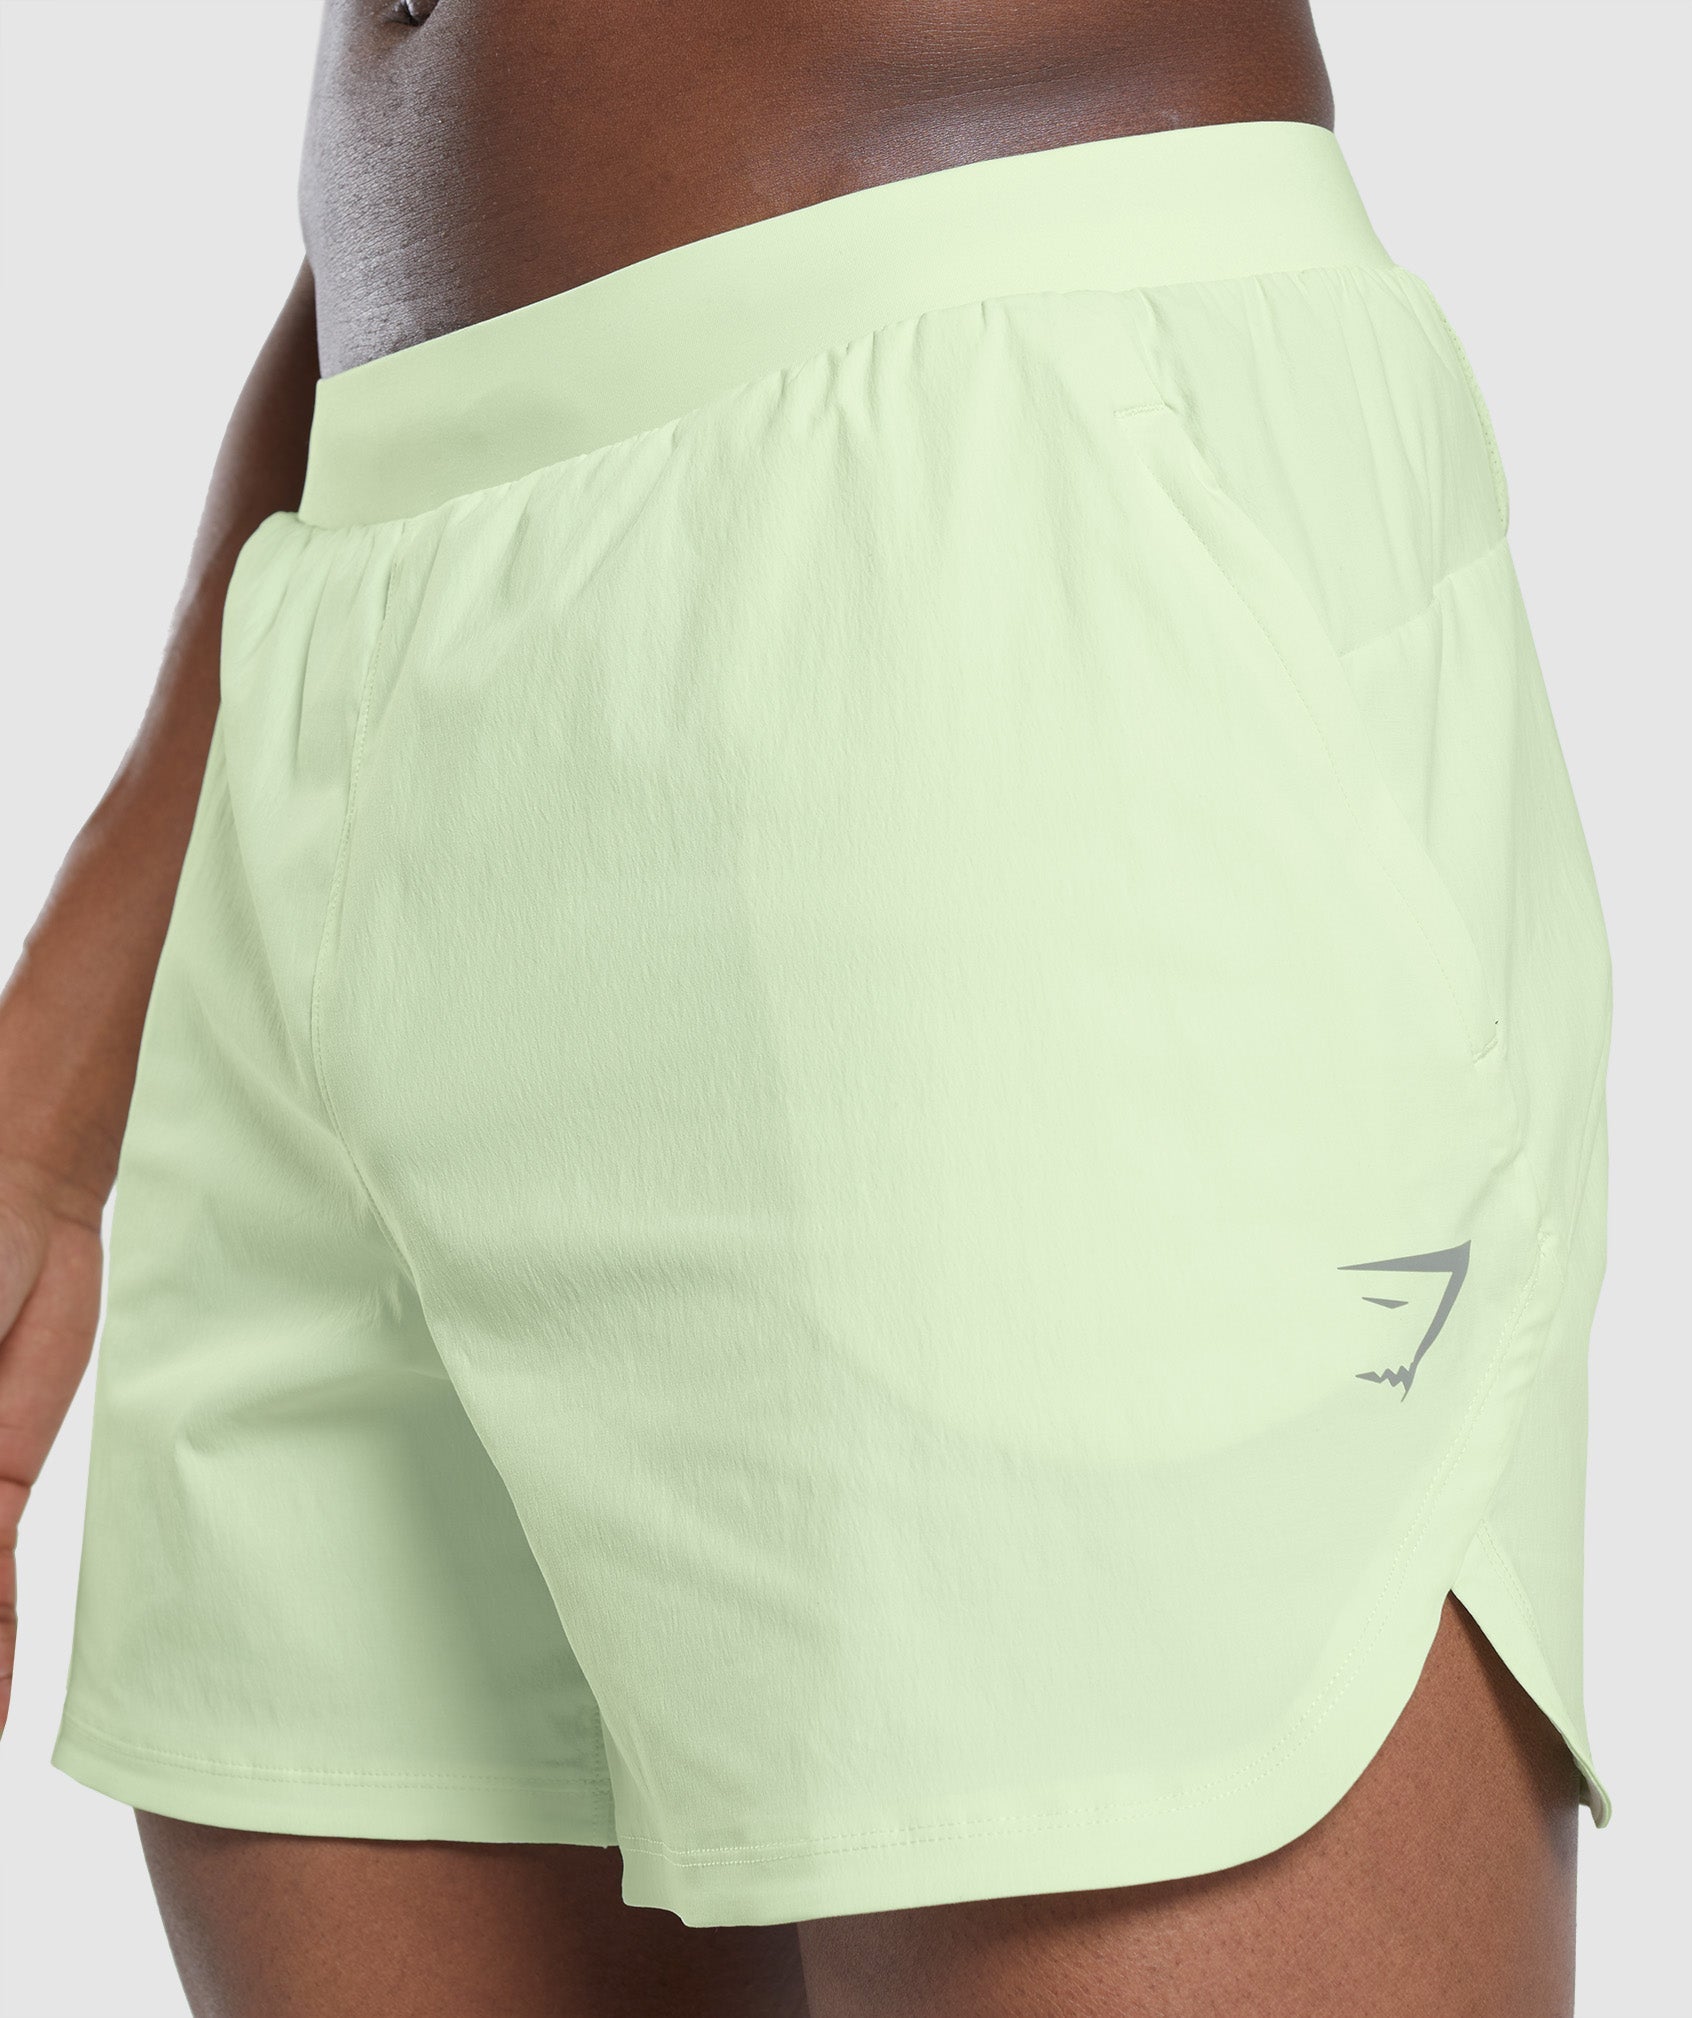 Speed Evolve 5" Shorts in Cucumber Green - view 6